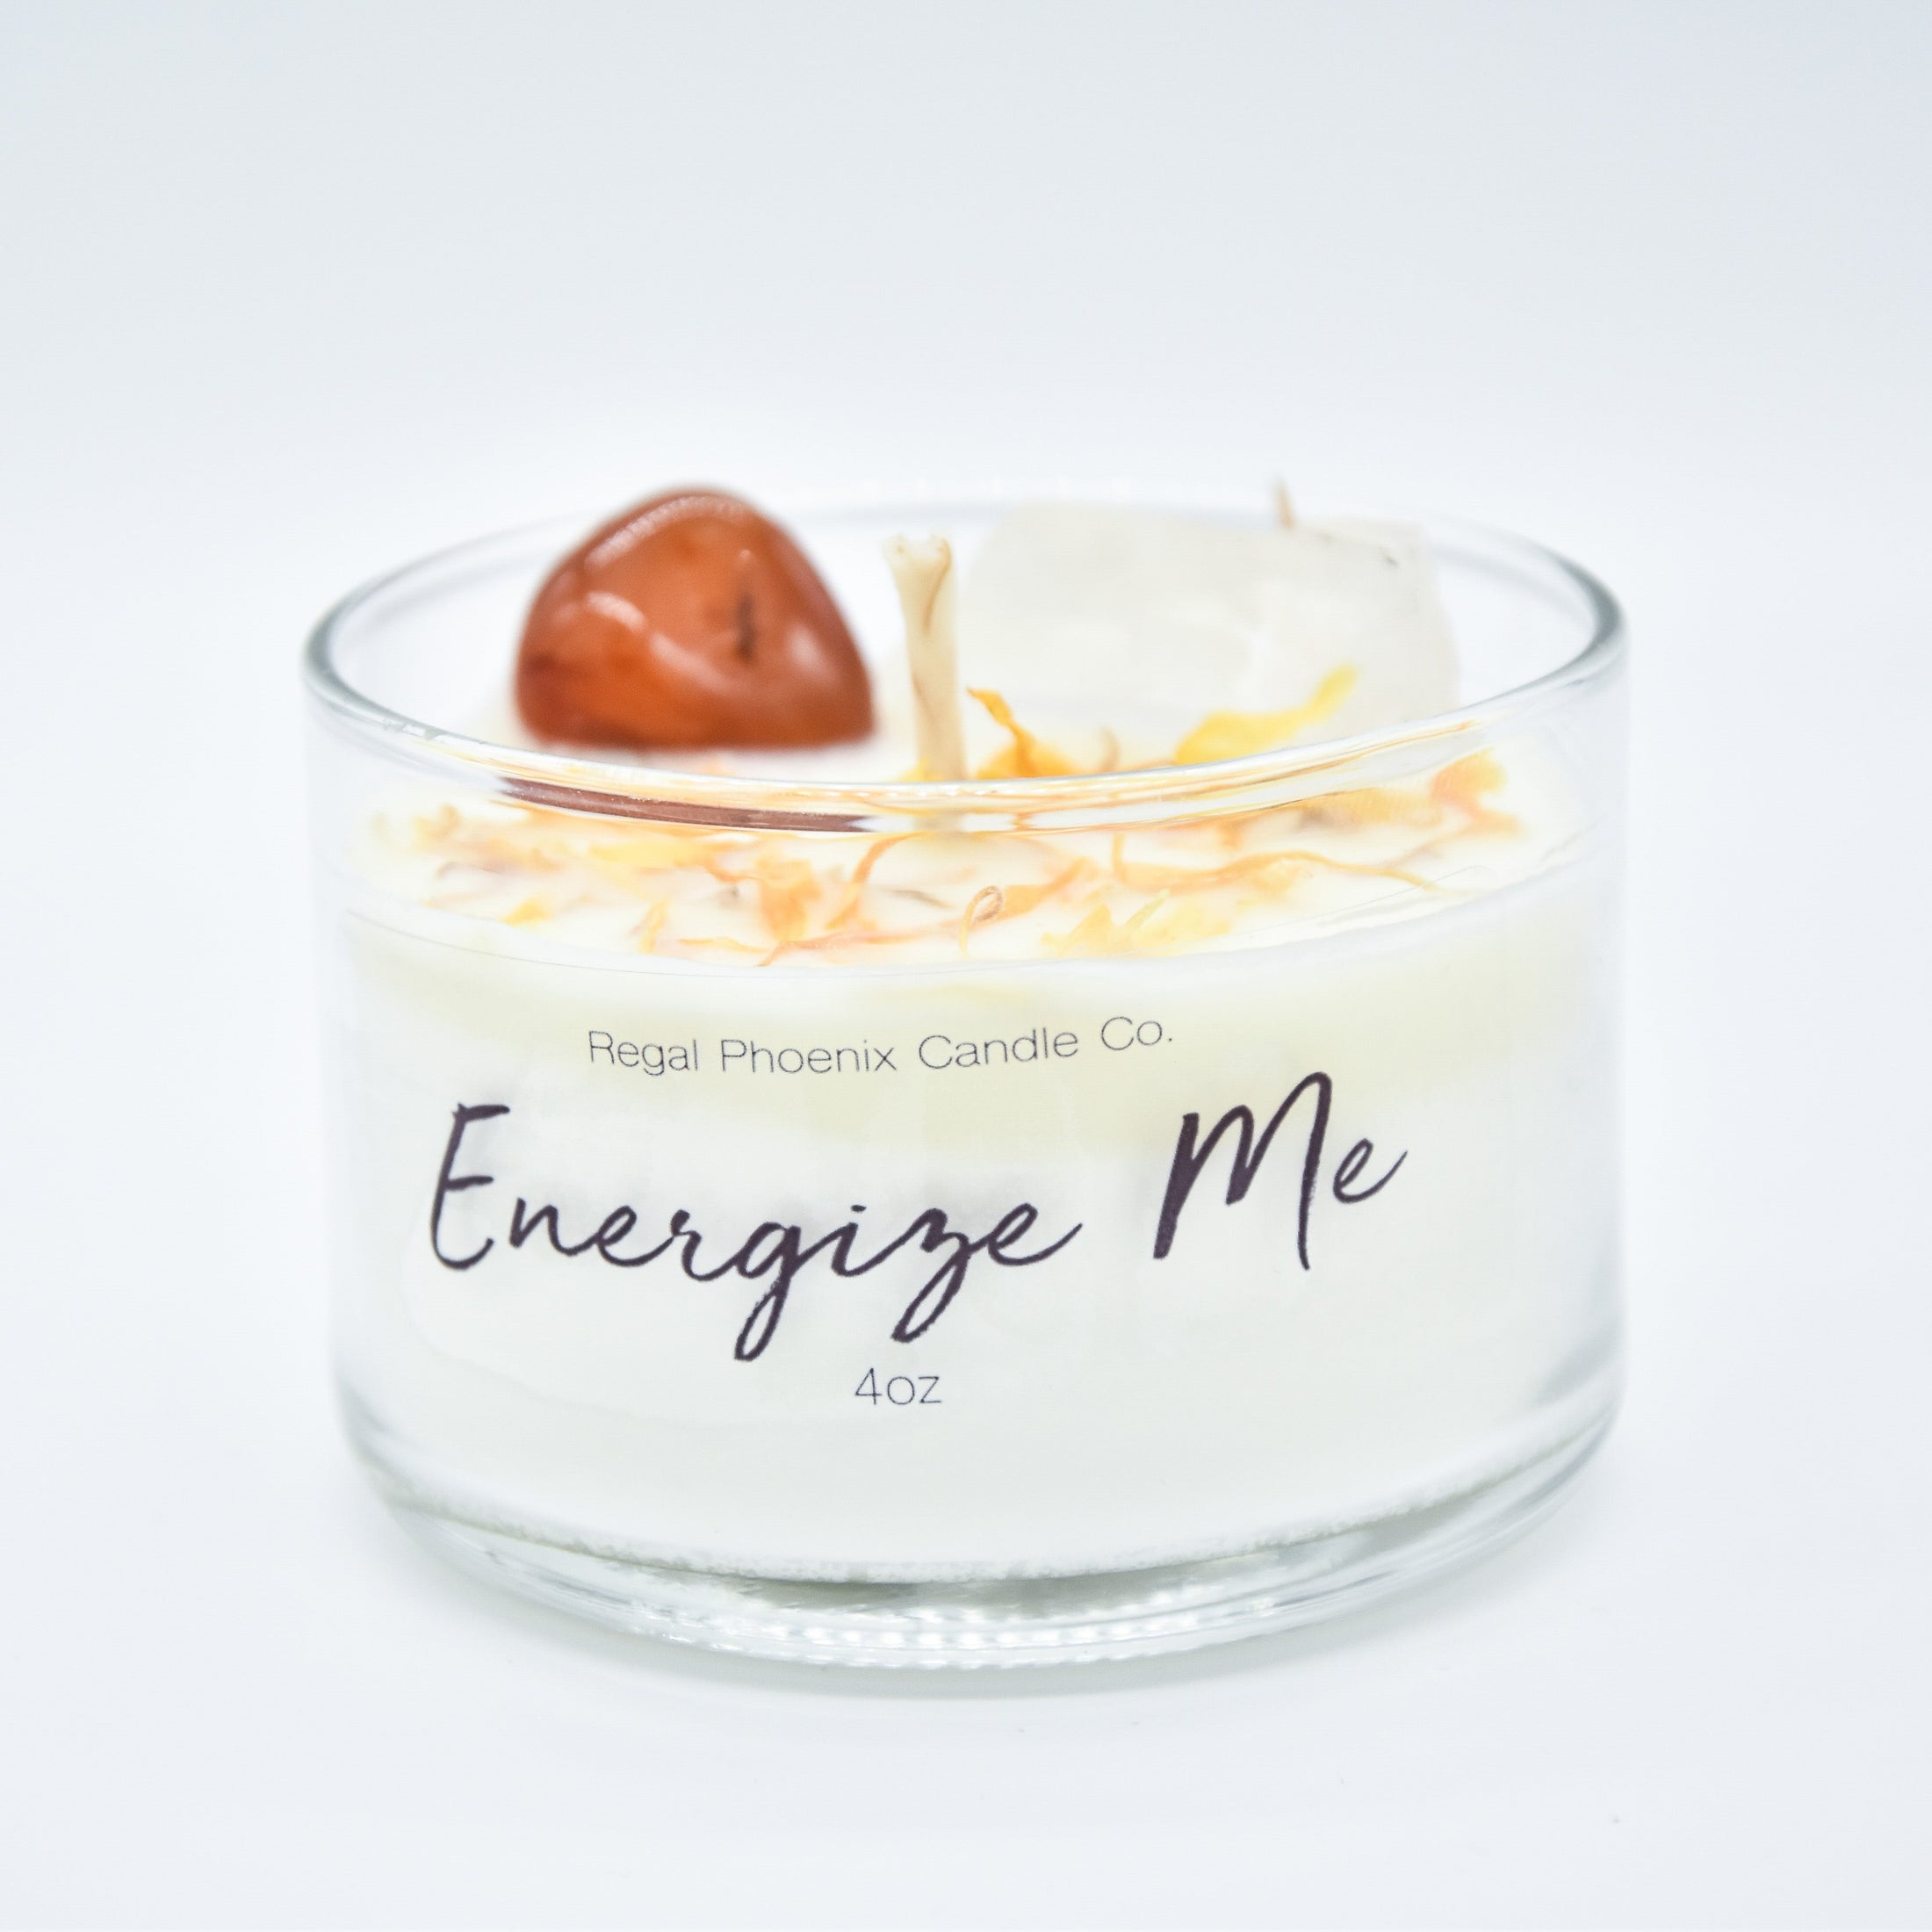 "Energize Me" Crystal Infused Soy Candle